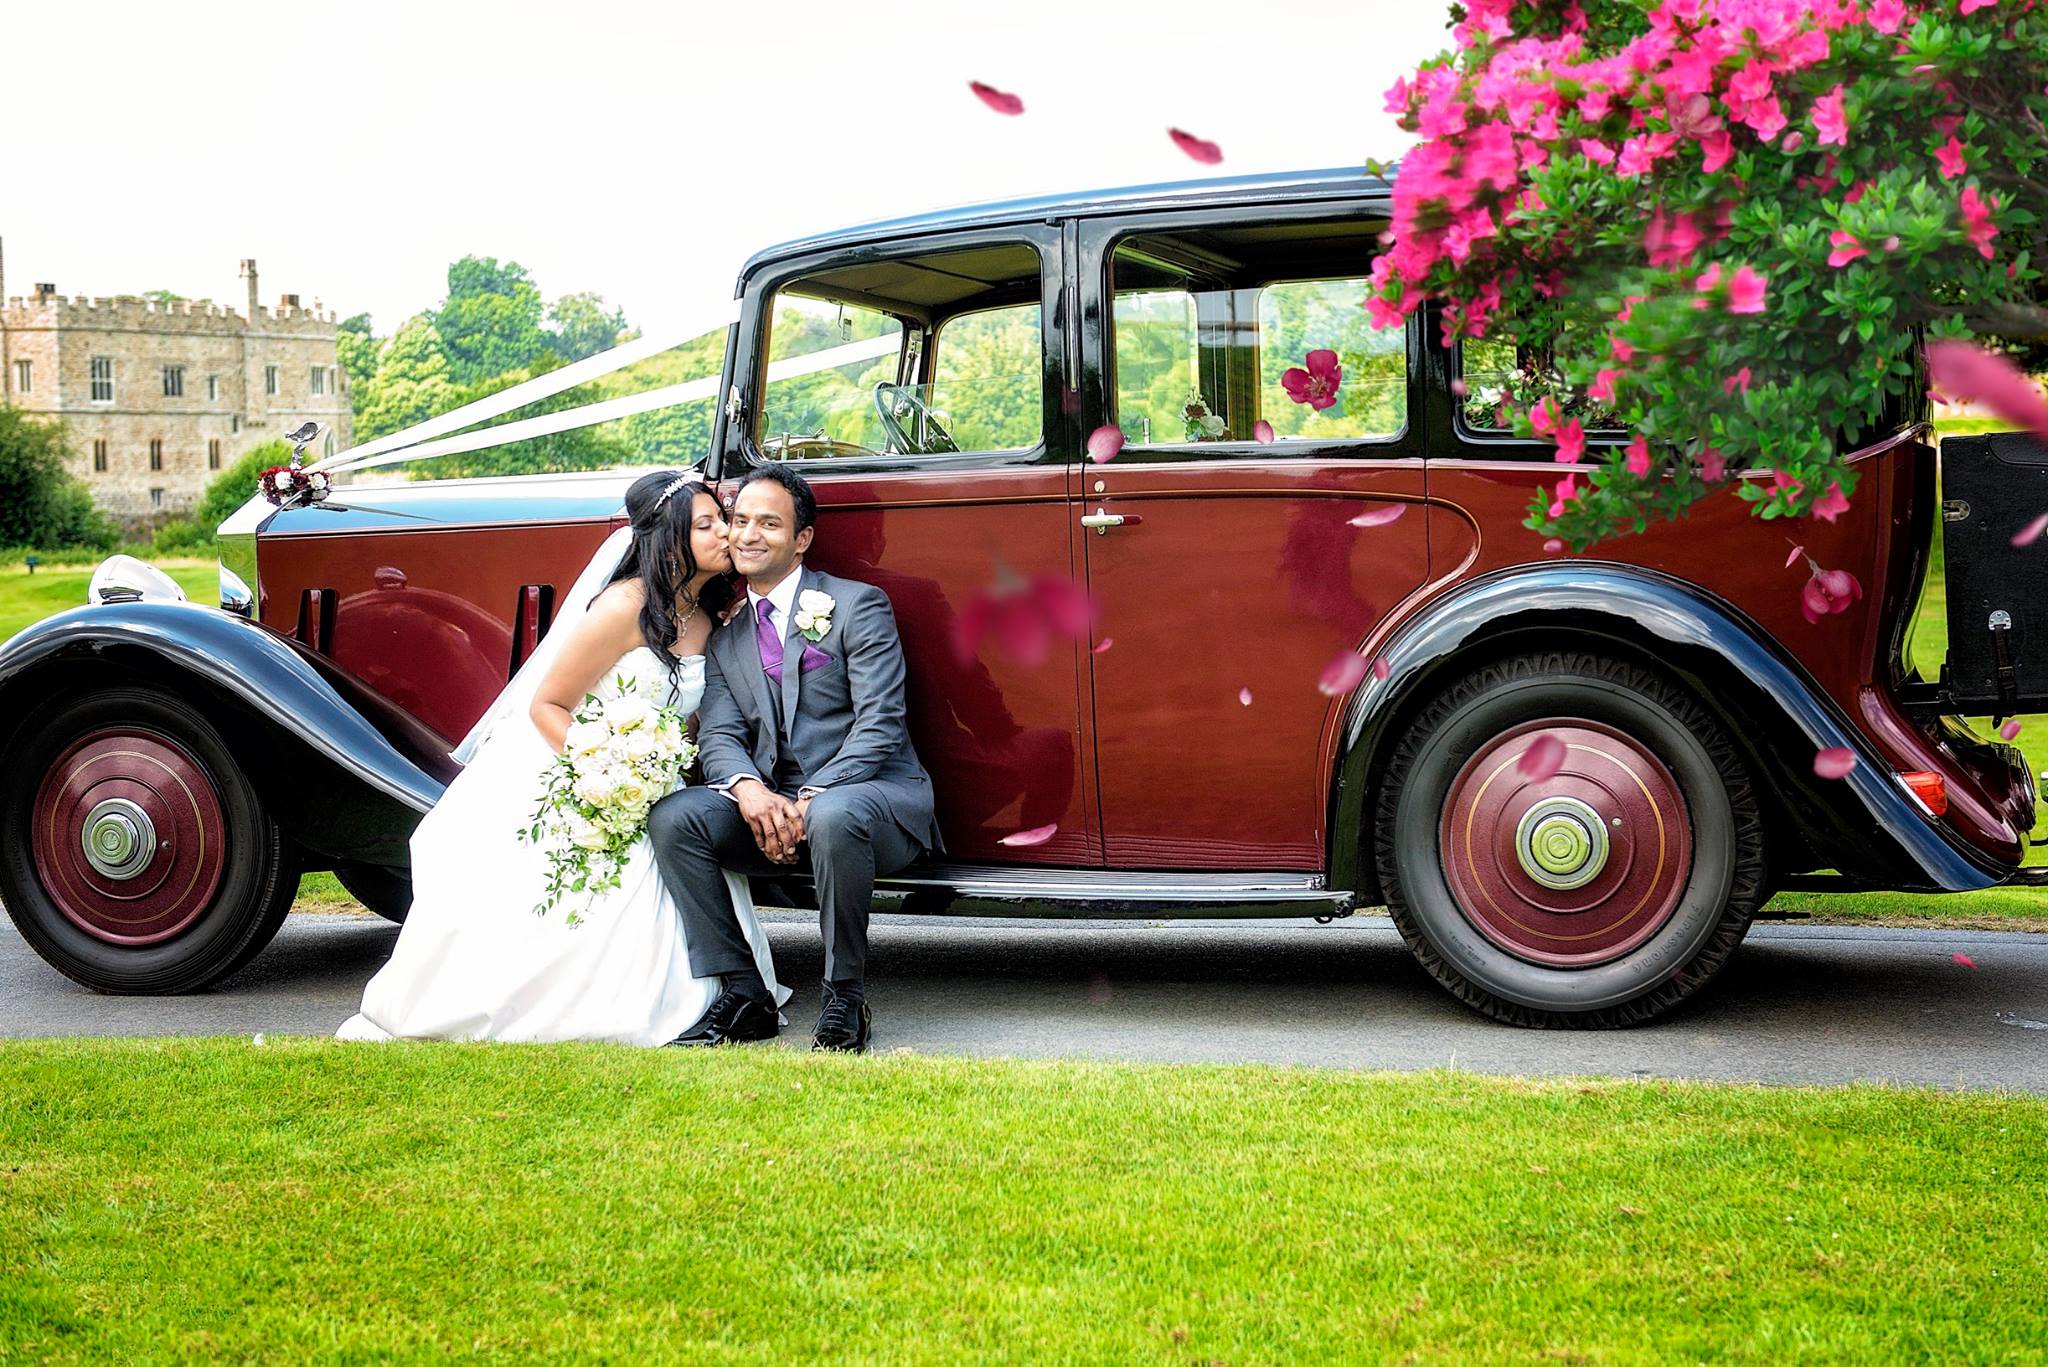 Leeds Castle wedding of Ruth and Paul. They rentet a clasic car to have their picture taken by artist Ovidiu Tiganus - local wedding photographer in Kent